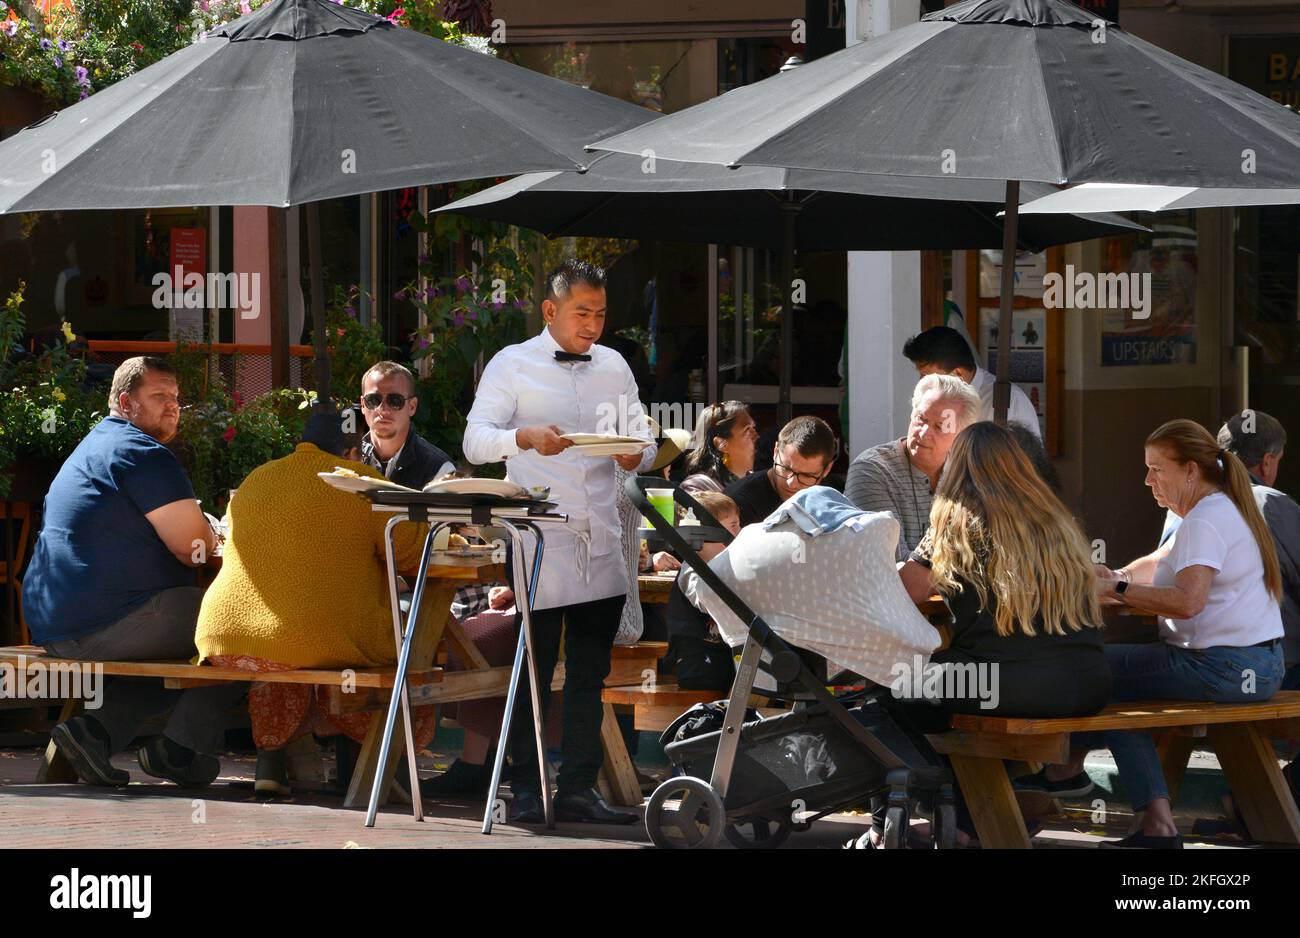 A waiter serves outdoor diners at a restaurant in Santa Fe, New Mexico. Stock Photo